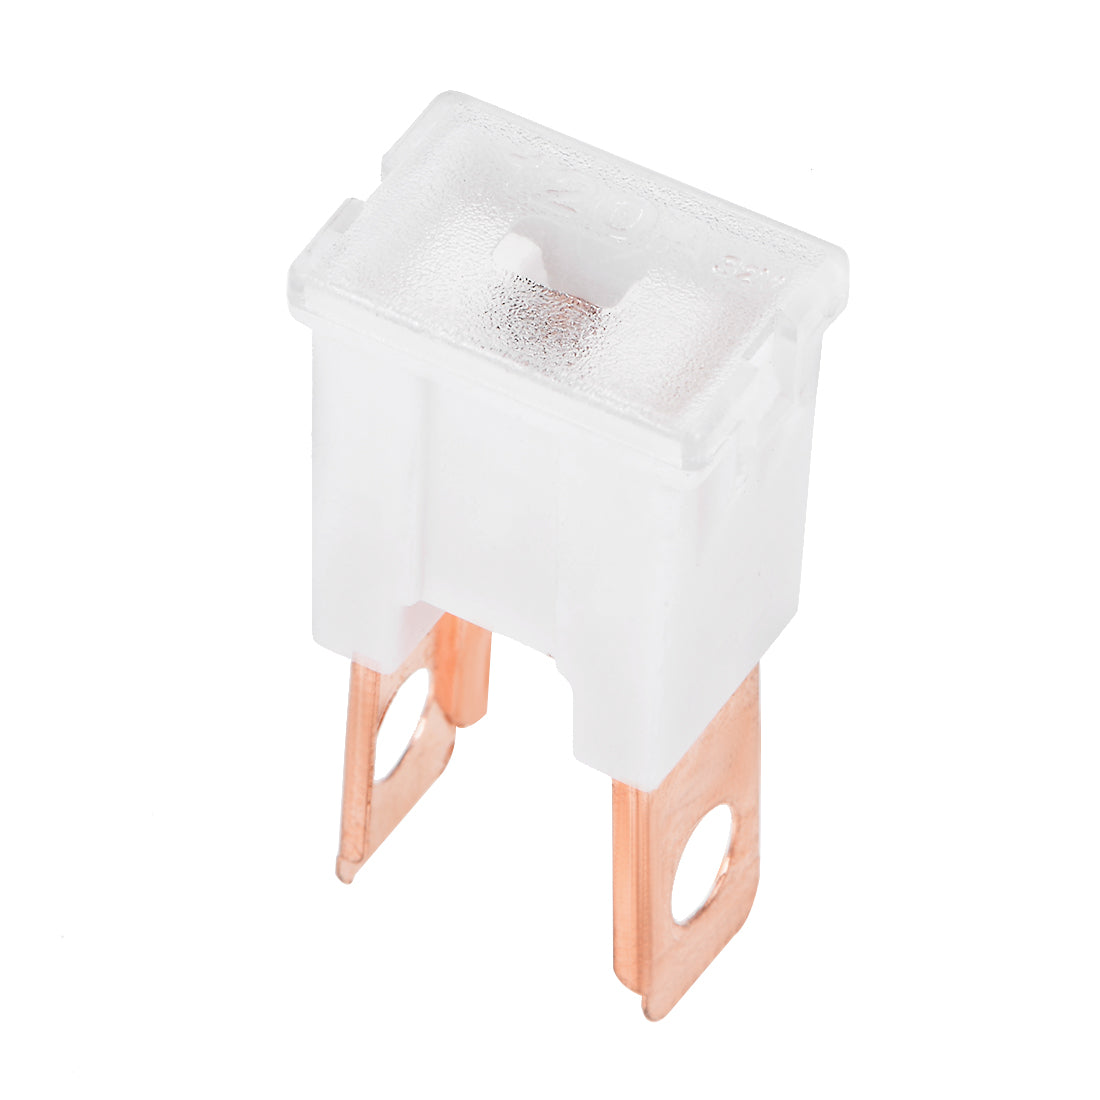 uxcell Uxcell Cartridge Fuse 32V 120A Male Terminal Blade J Case Box for Truck